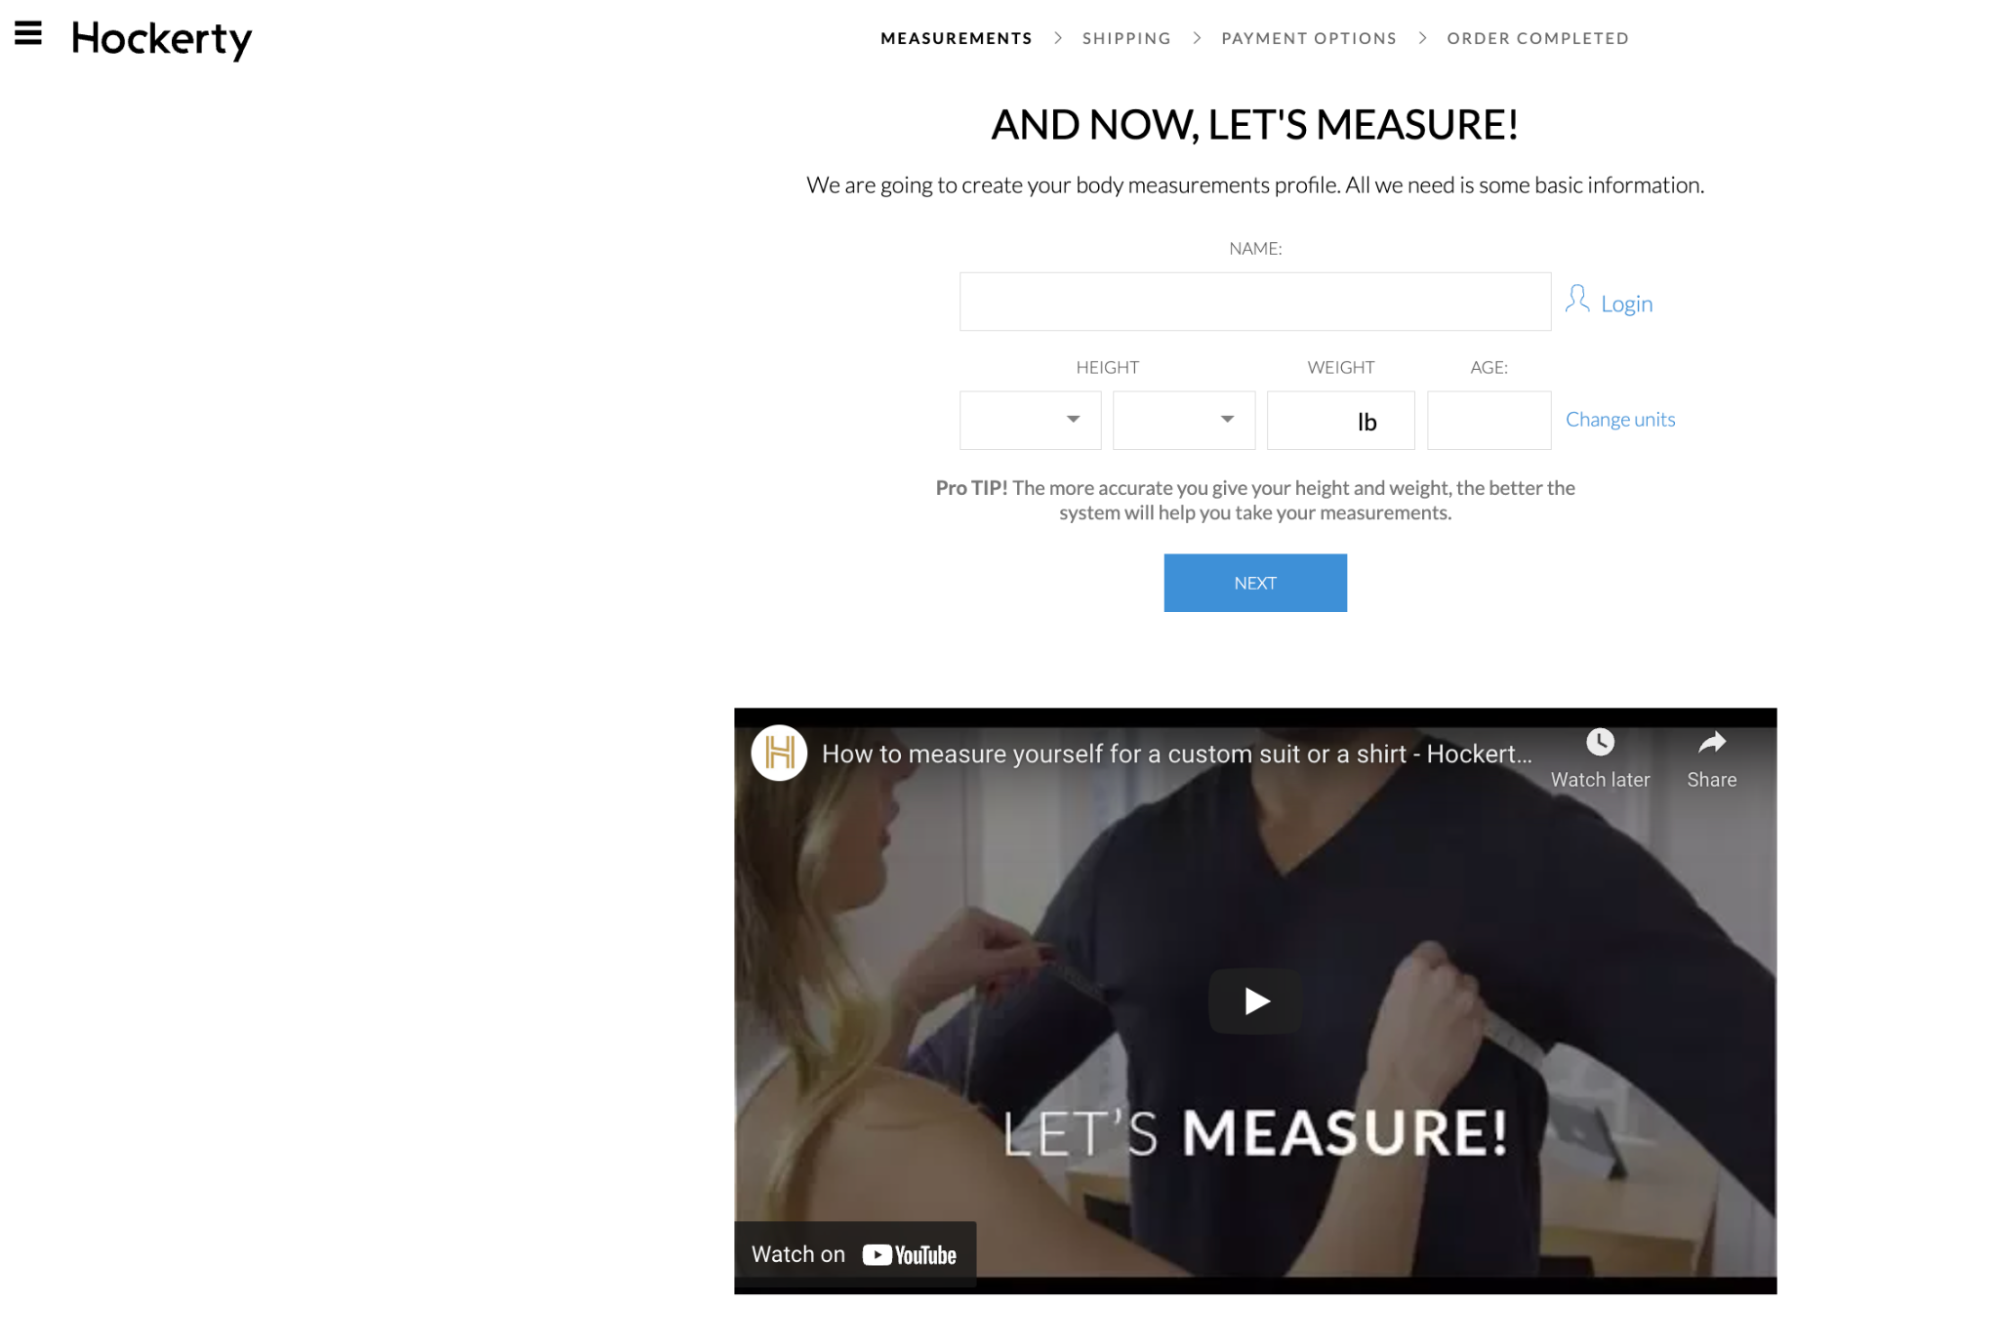 Hockerty suit measurement tool direct-to-consumer brands